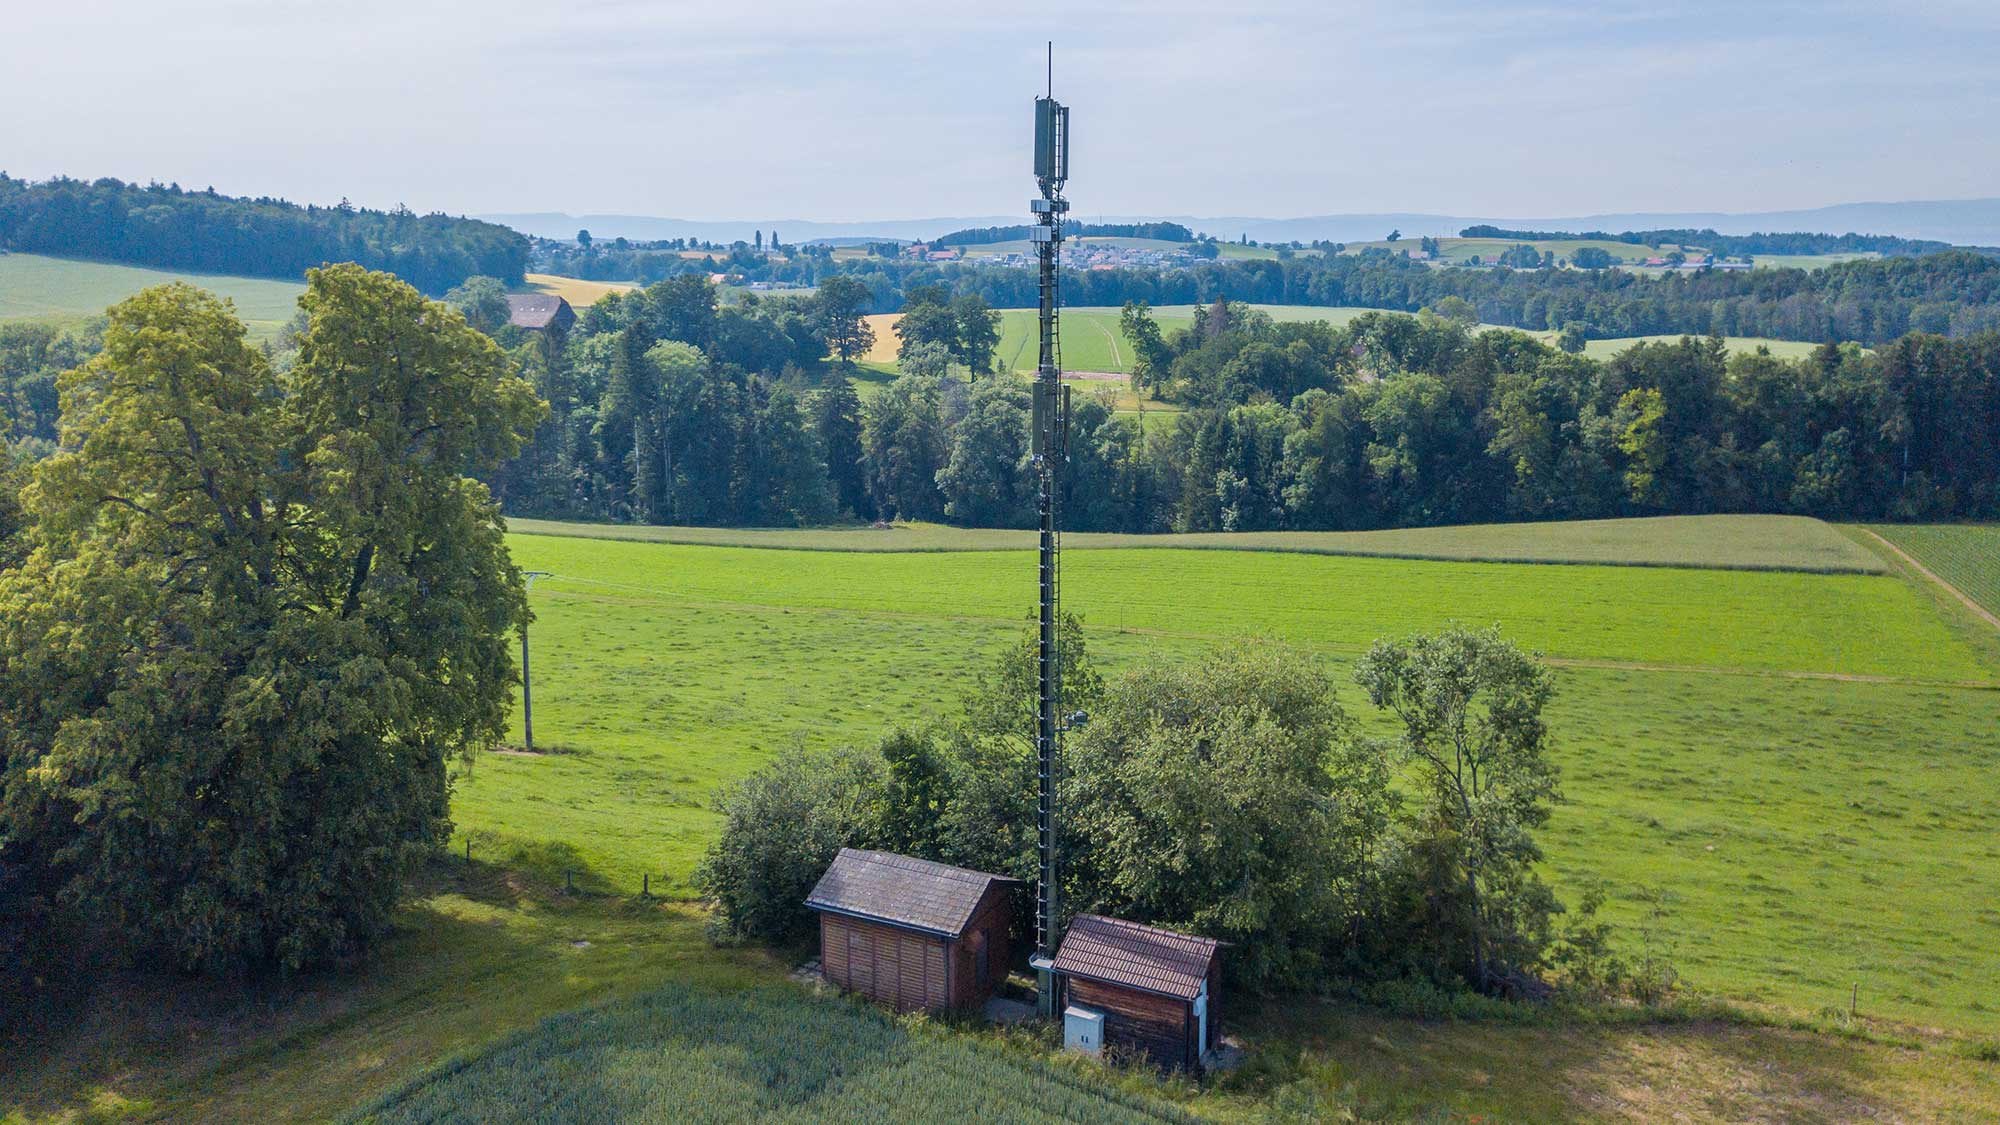 Cell tower next to two houses in front of a green landscape with trees. The 5G operation succeeds without environmental impact.